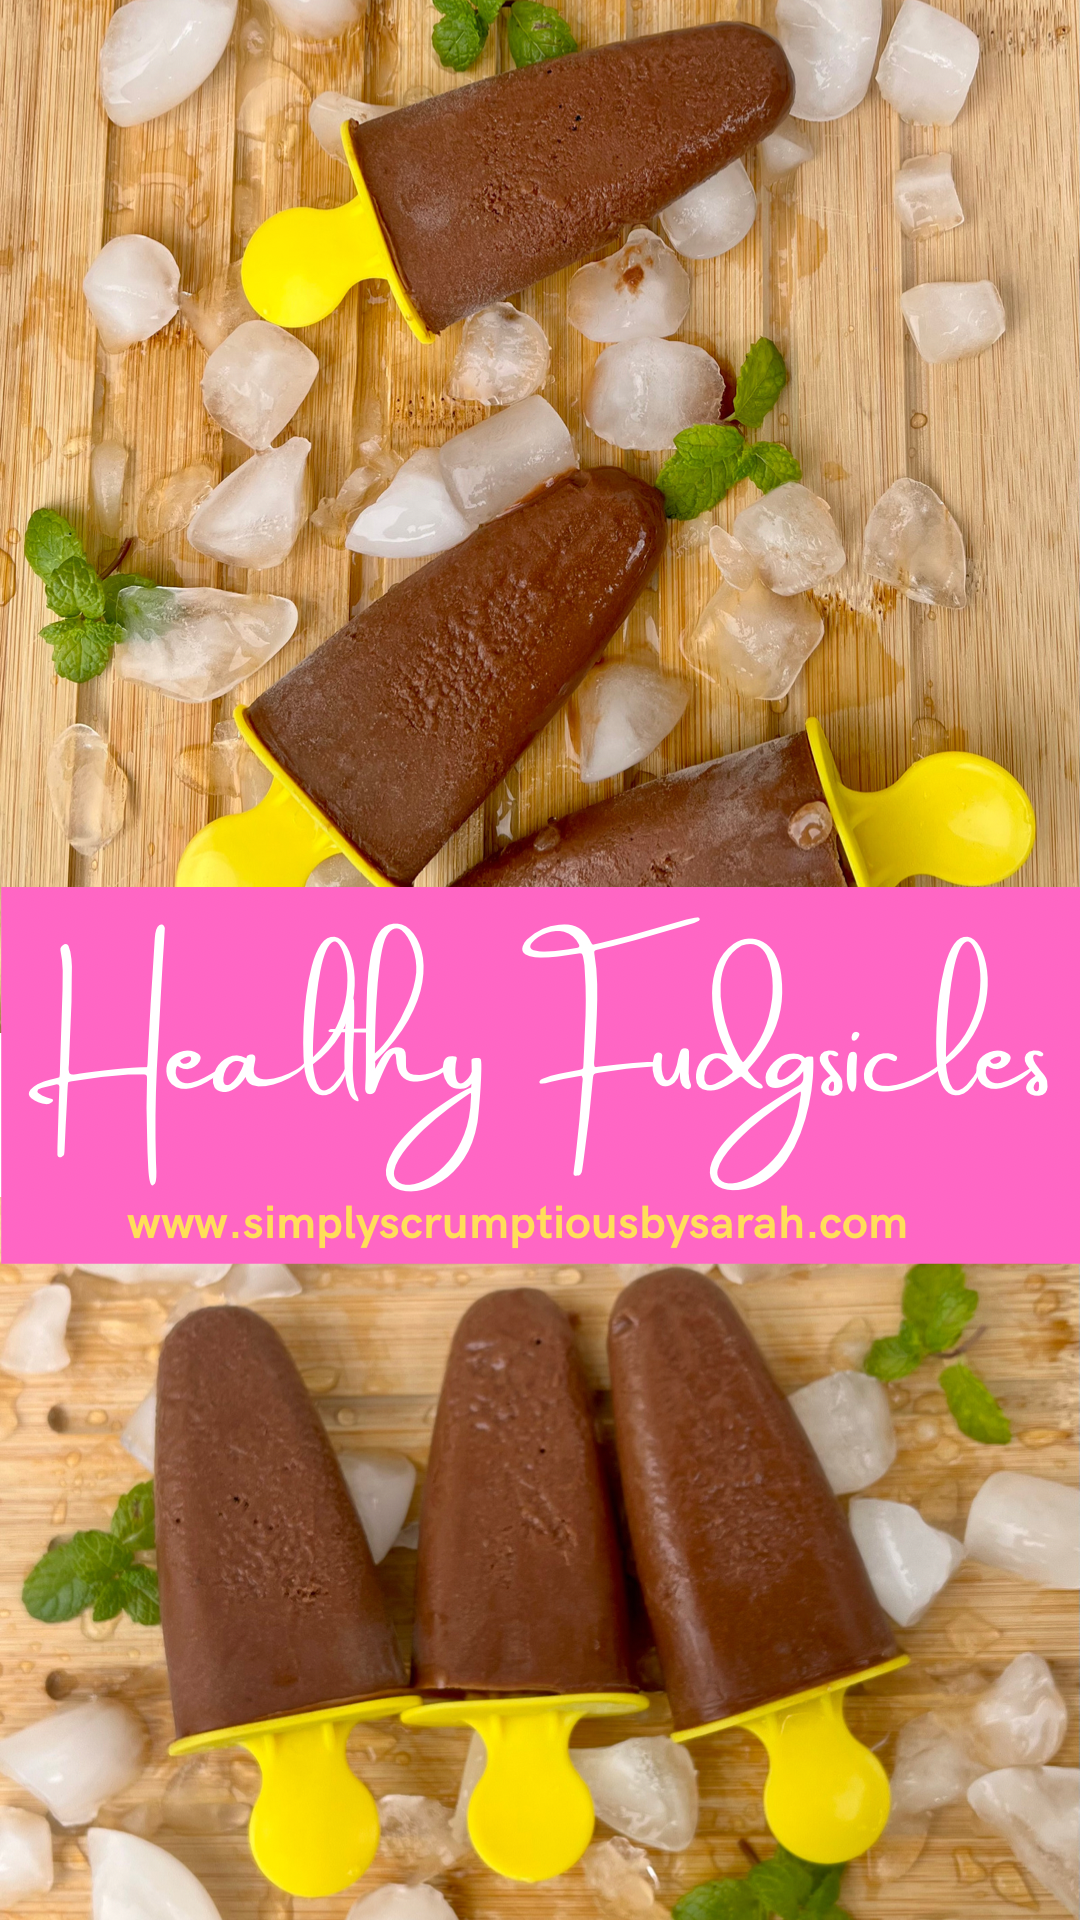 Healthy Fudgsicles - Simply Scrumptious by Sarah